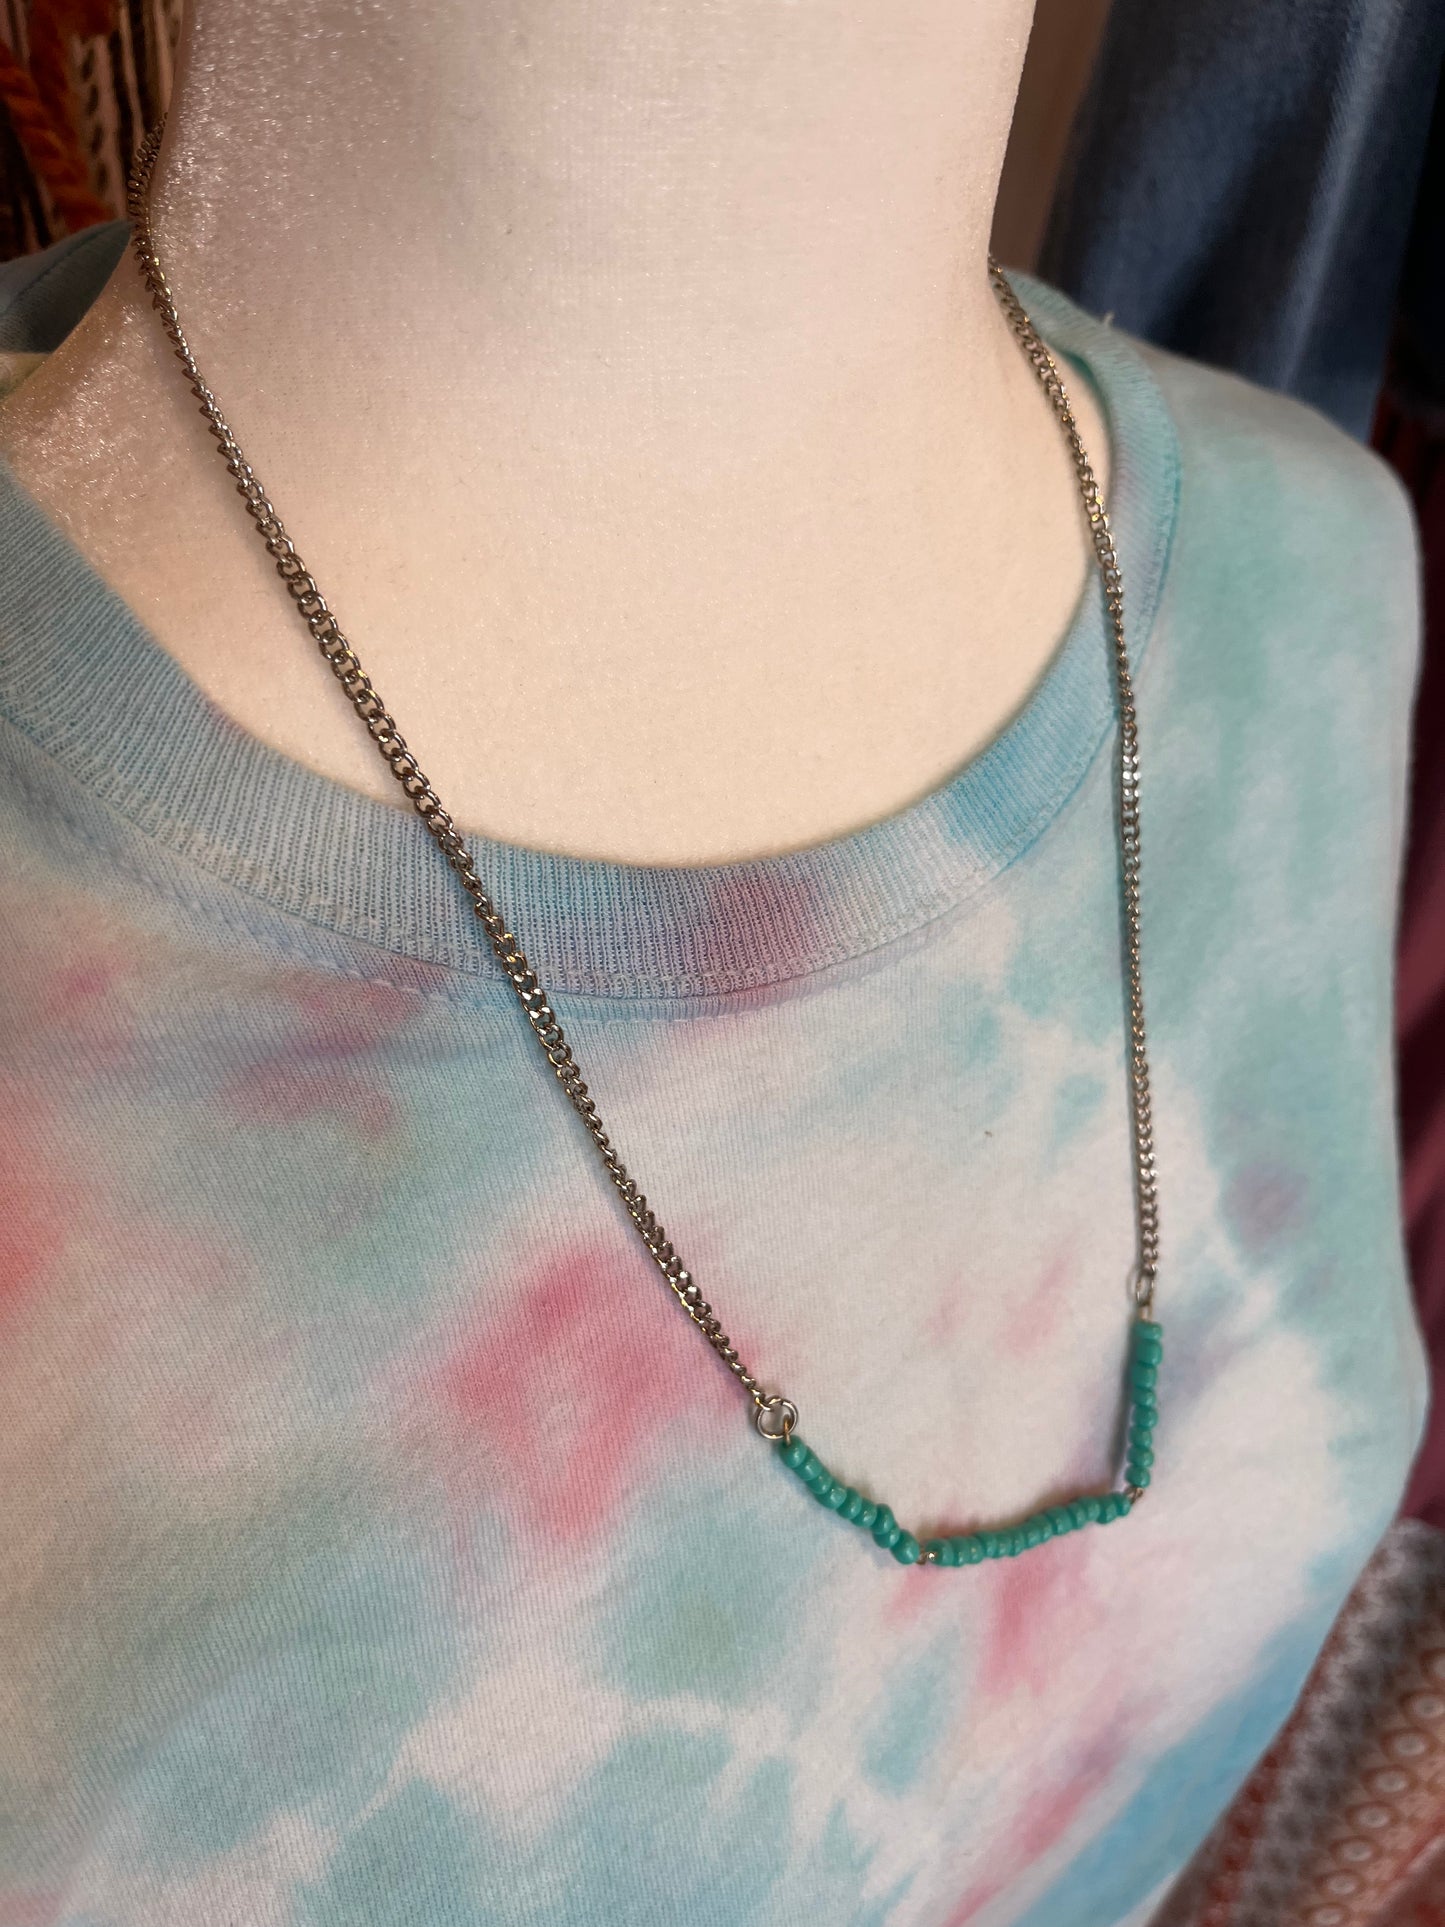 Simple turquoise colored beaded bar necklace